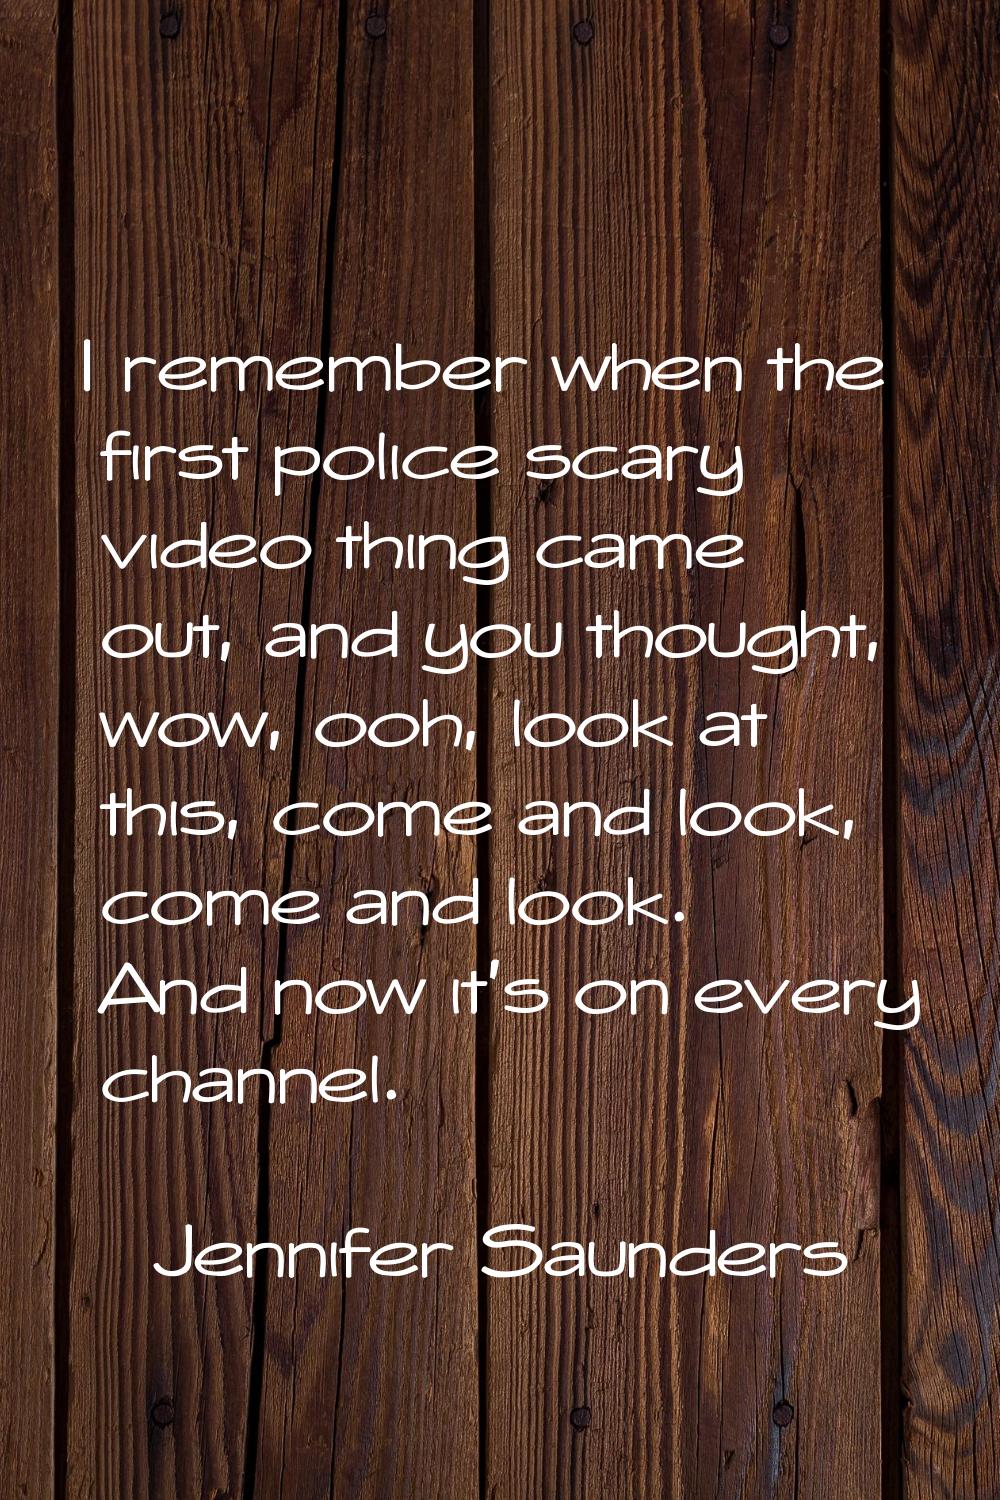 I remember when the first police scary video thing came out, and you thought, wow, ooh, look at thi